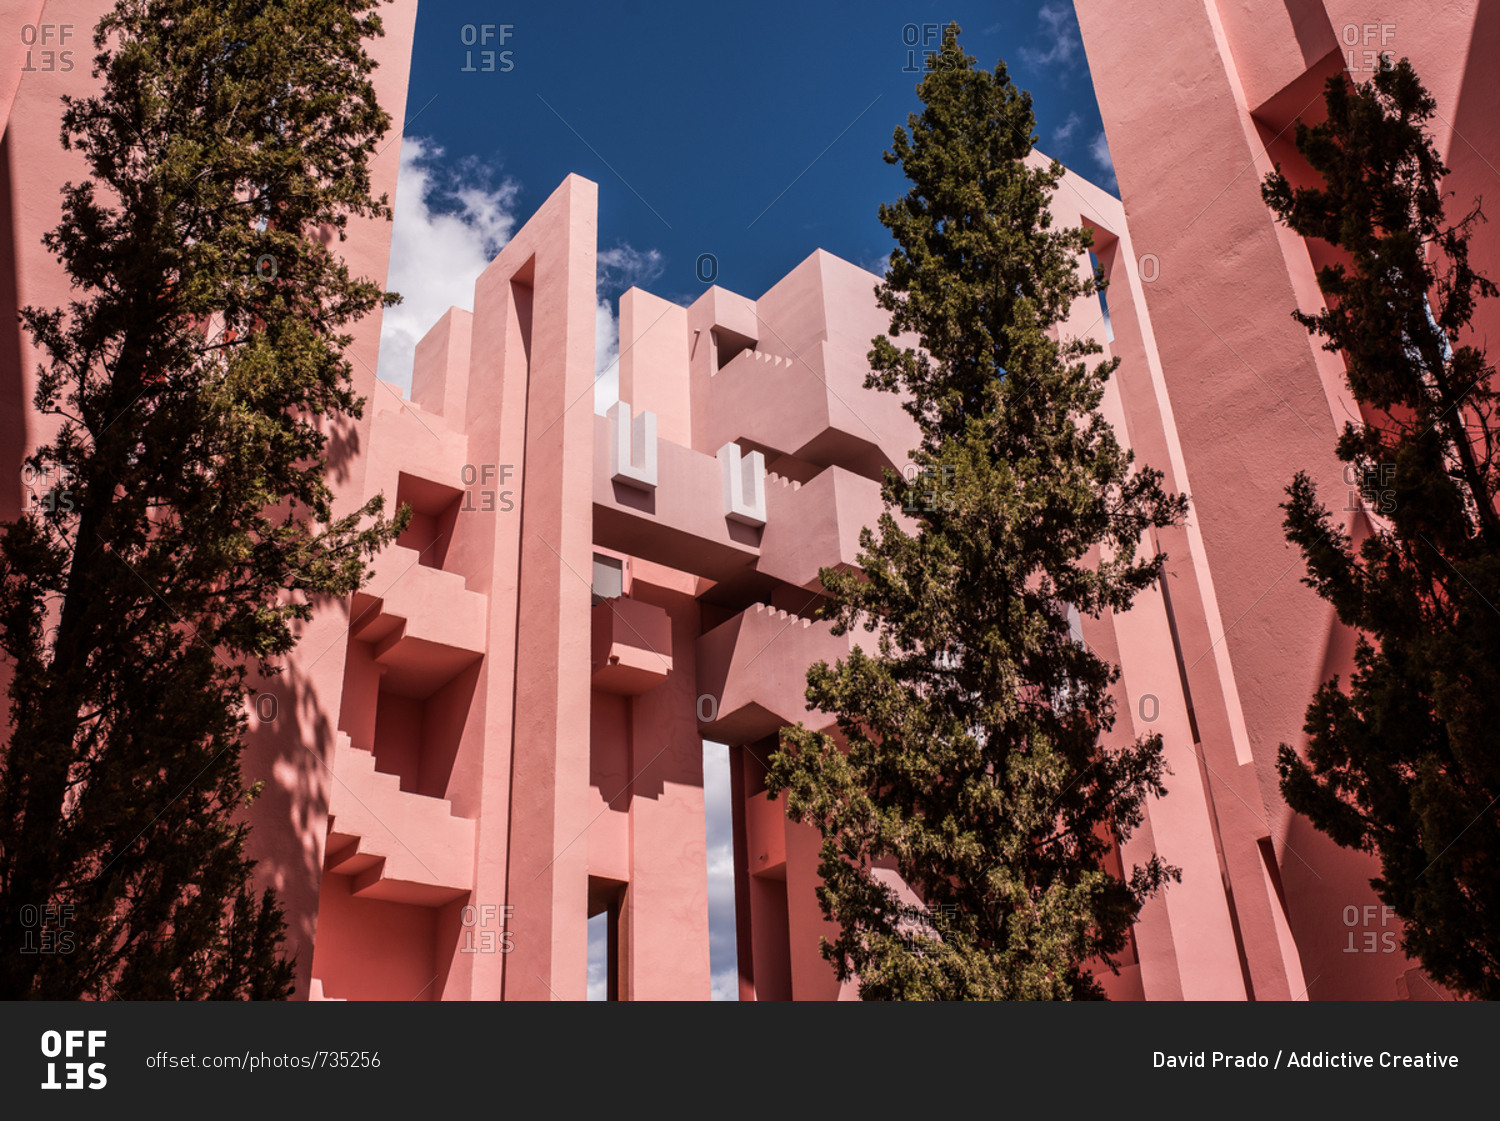 Modern architecture pink building - Offset stock photo -\
OFFSET